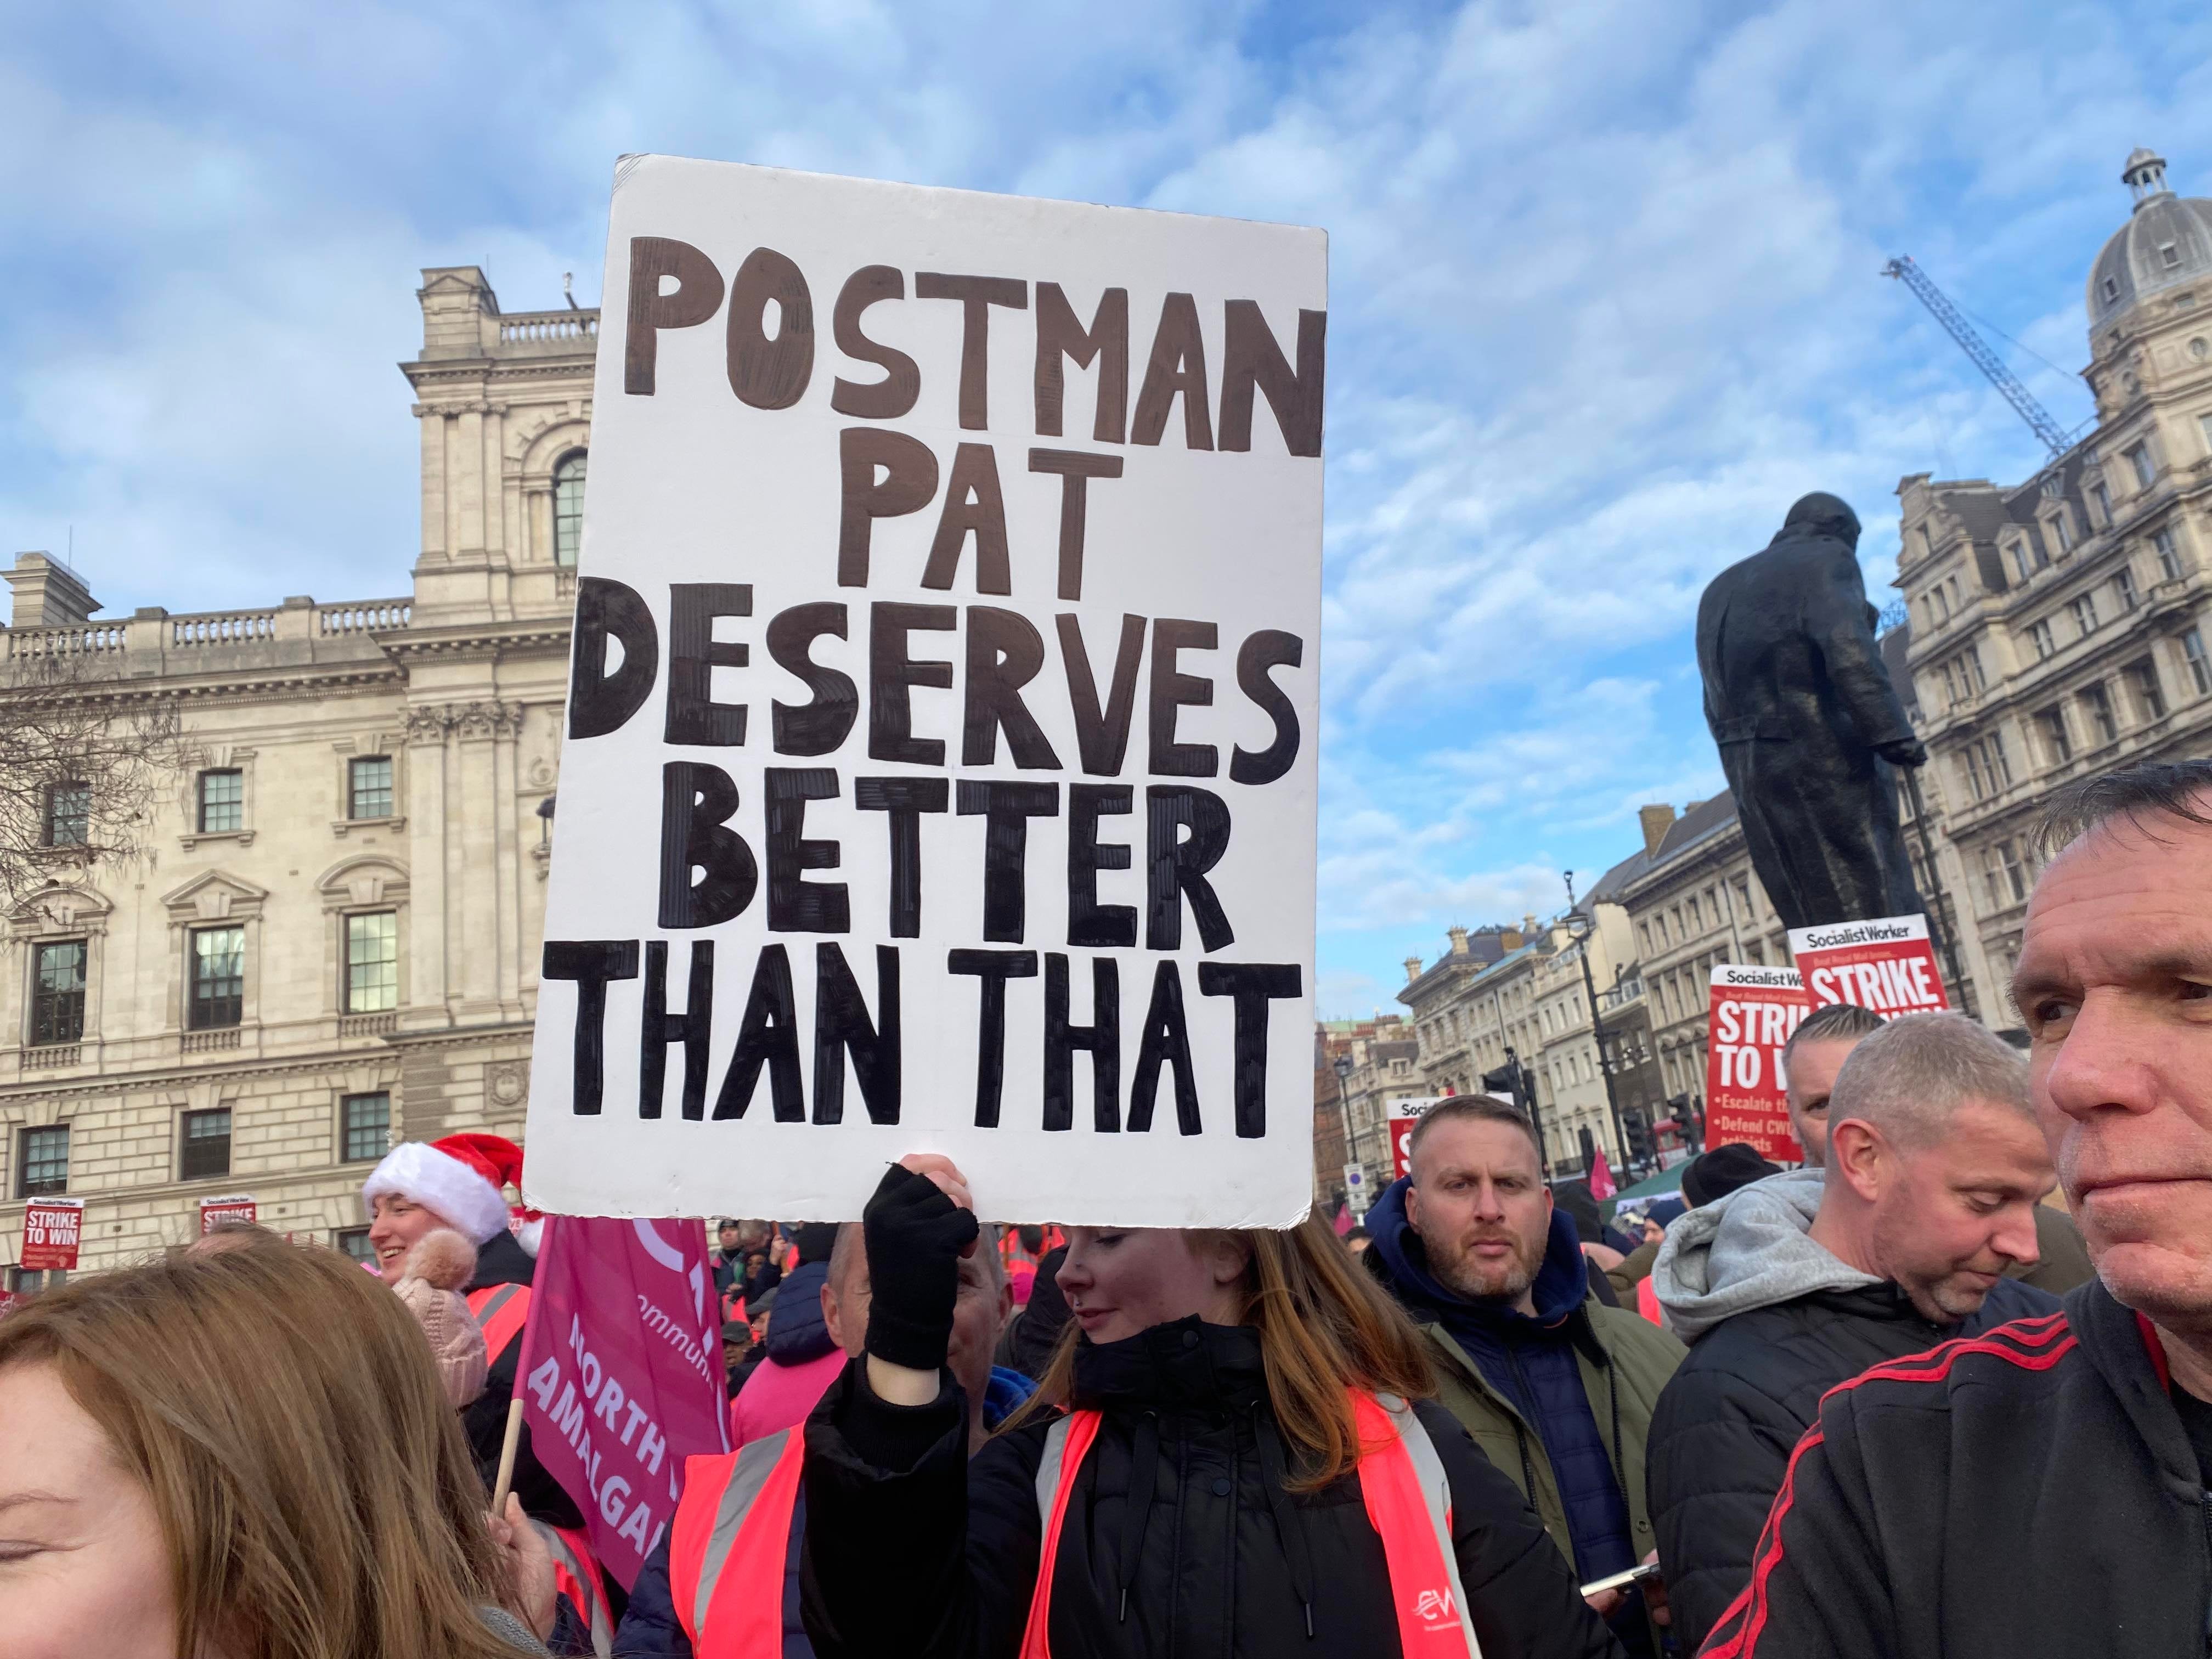 Striking postal worker holds placard reading ‘Postman Pat deserves better than that’ at Parliament Square rally